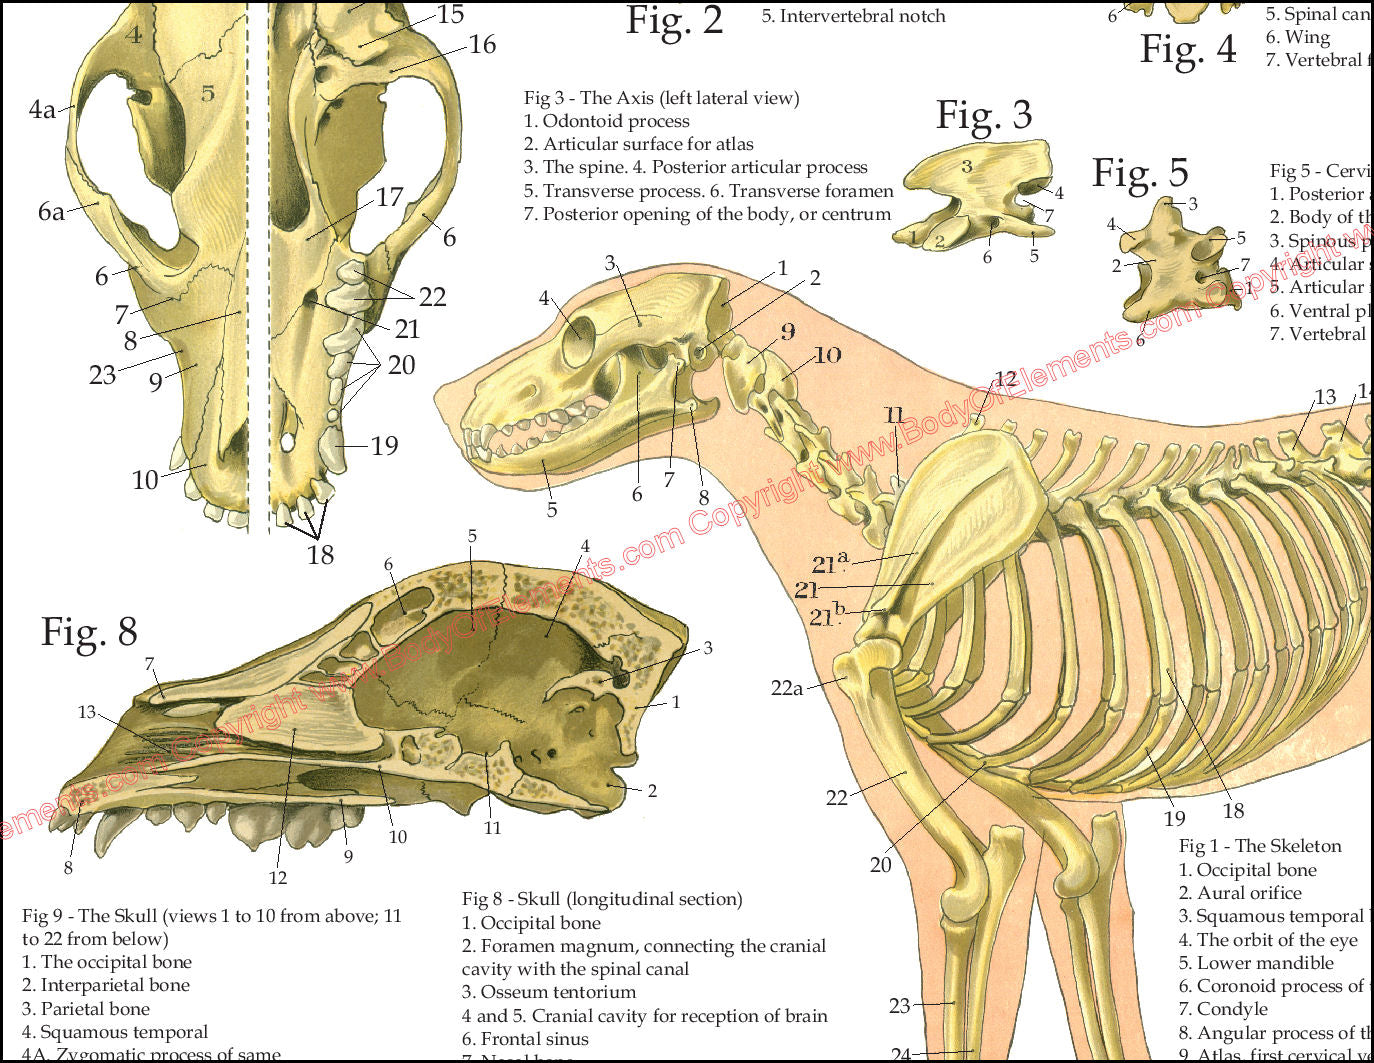 Skeletal and skull anatomy of the dog